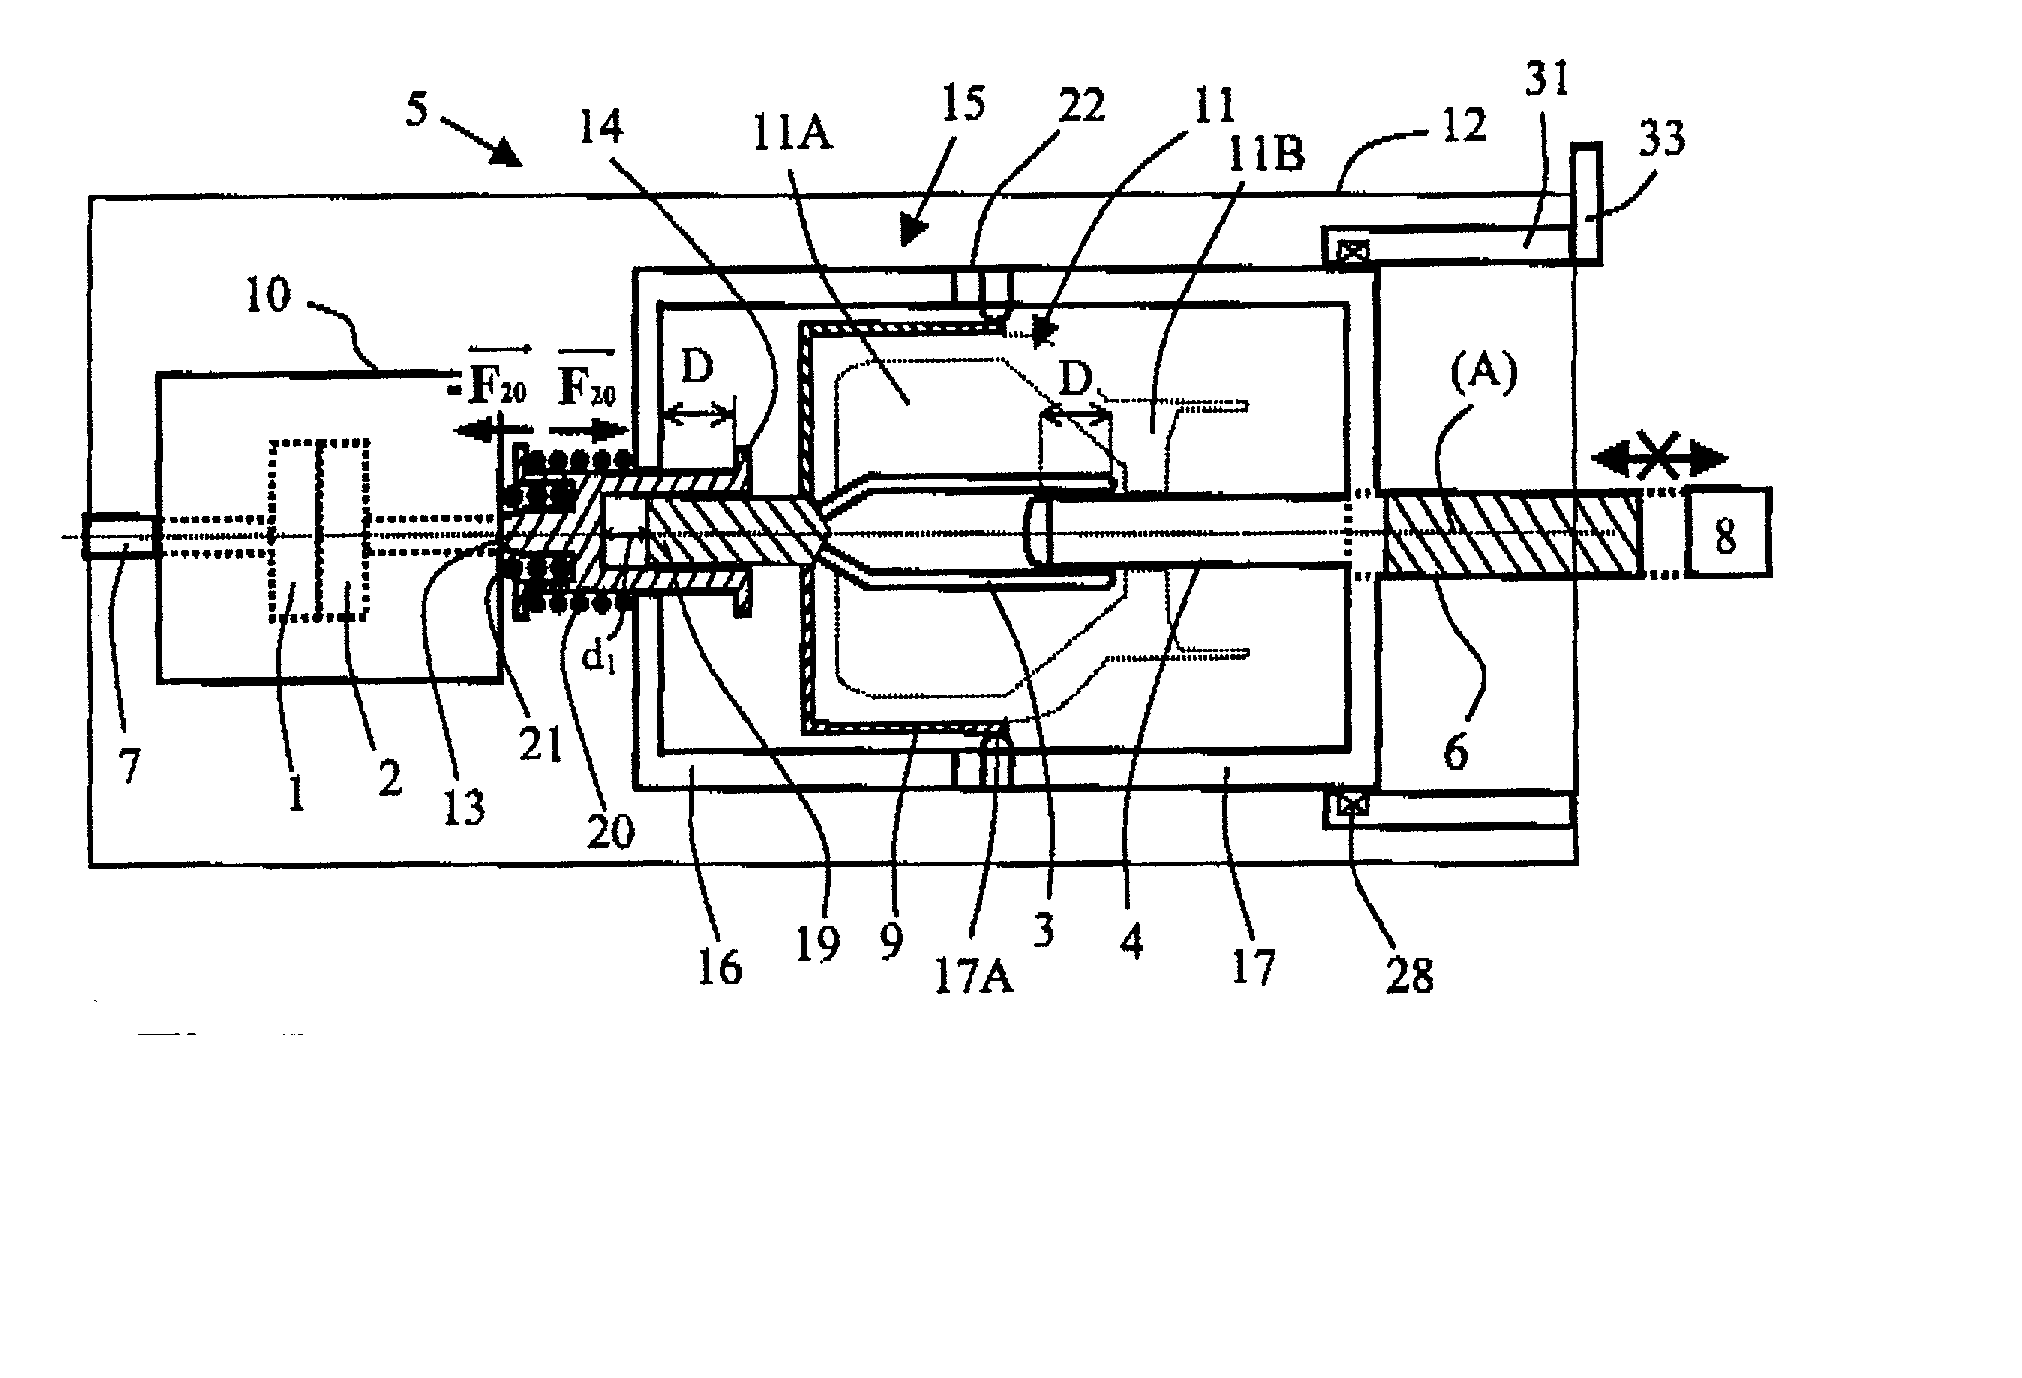 High-voltage interrupter device having combined vacuum and gas interruption